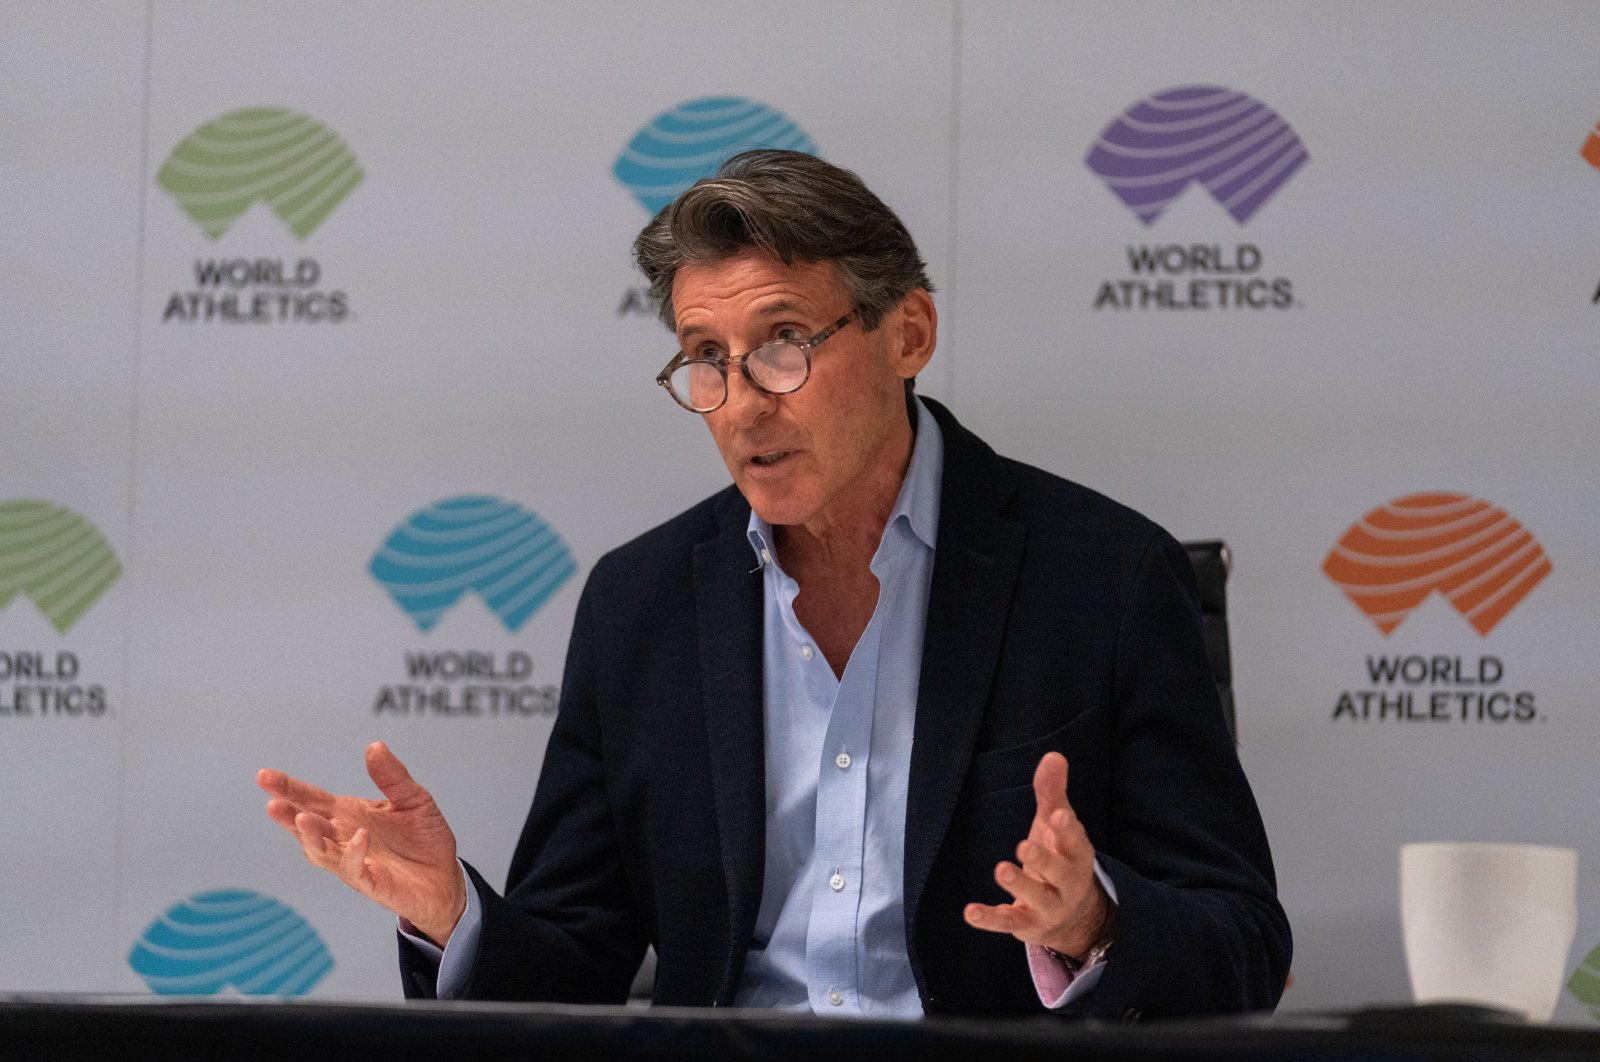 World Athletics President Sebastian Coe has adopted a much tougher line on Russia over its invasion of Ukraine than his IOC counterpart Thomas Bach ©World Athletics